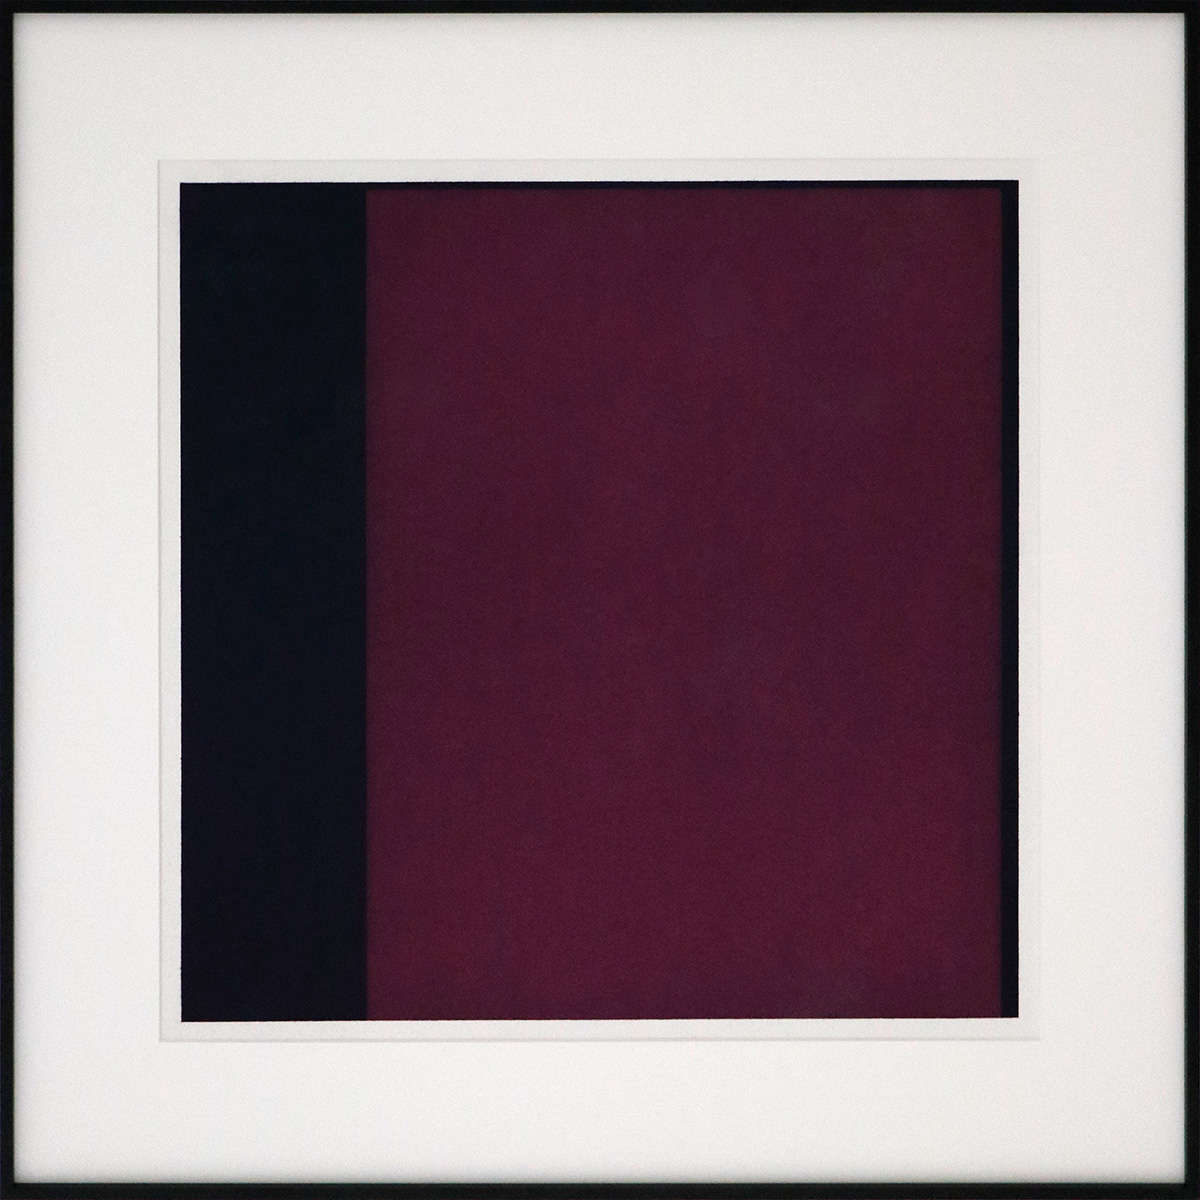 Unbound Maroon, 200150 x 50 cm in 70 x 70 cmAcrylic and charcoal on paper; framed, museum glass